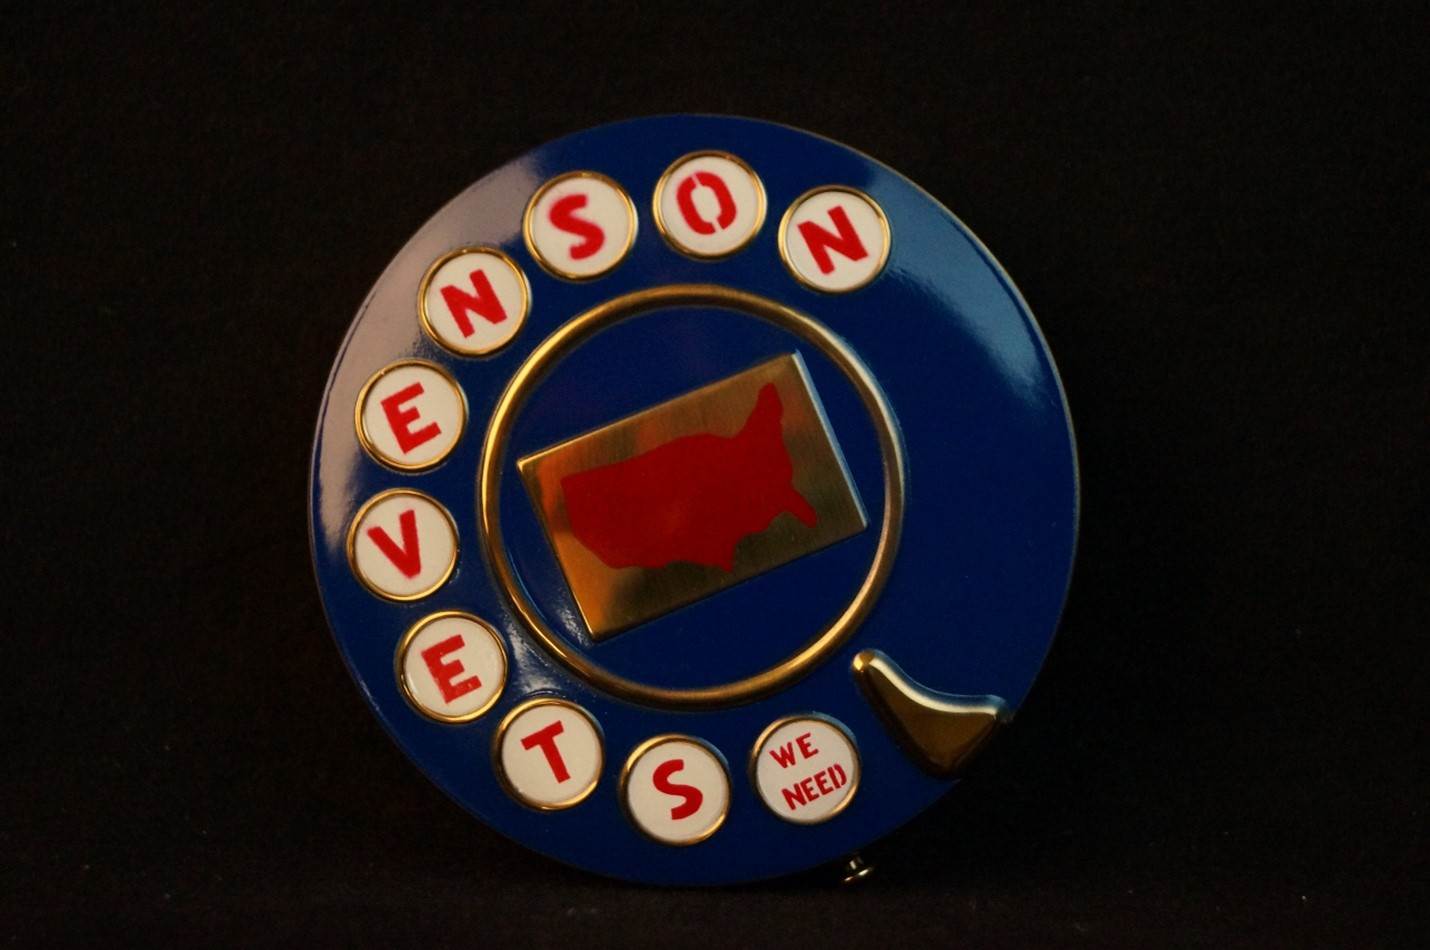 This Stevenson make-up compact in the style of a rotary telephone shows that while distrustful of campaign marketing, Stevens